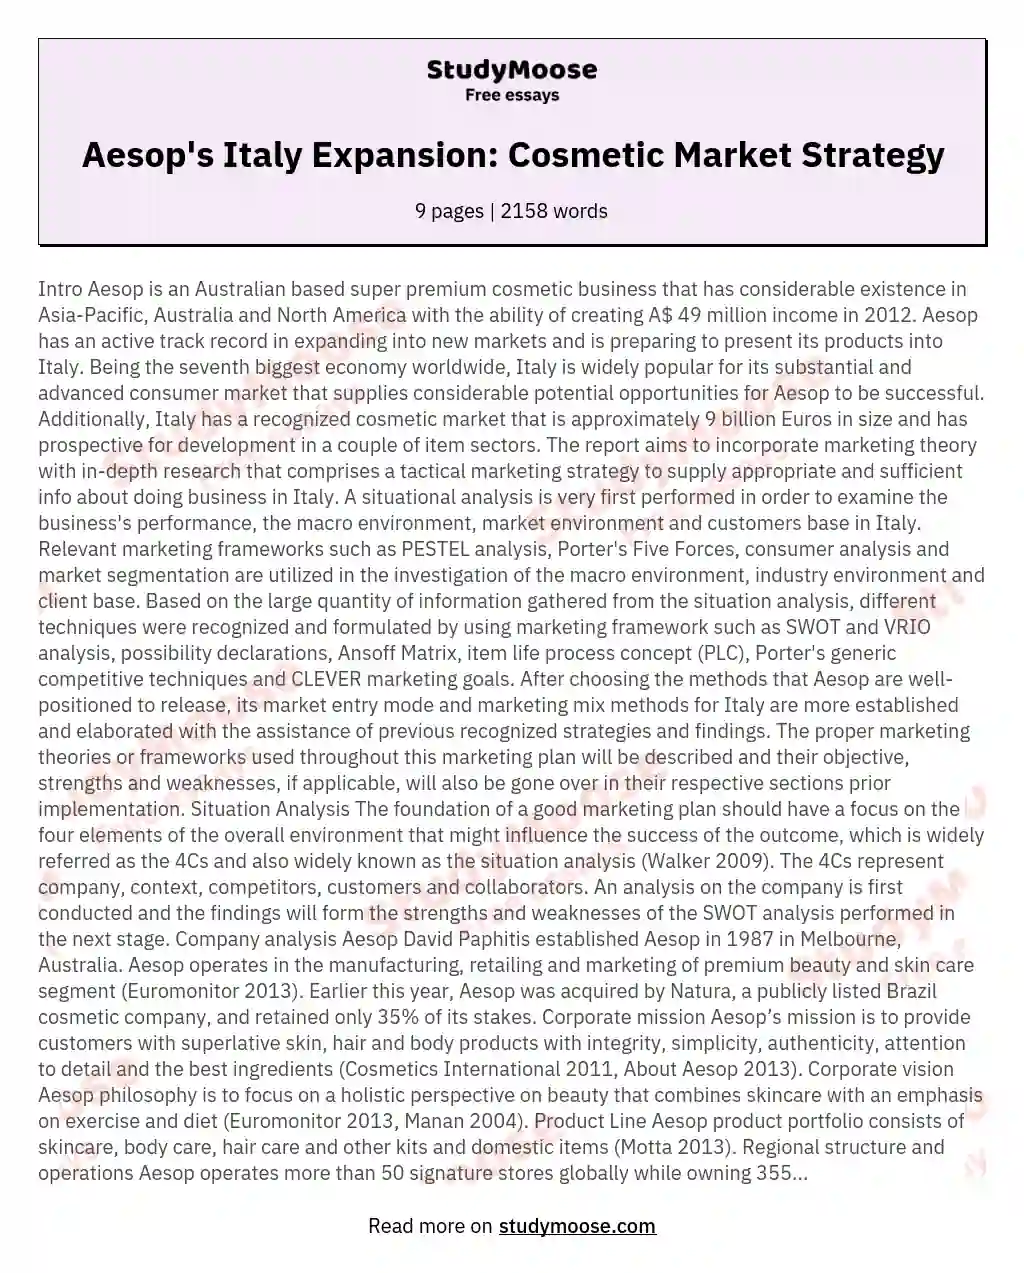 Aesop's Italy Expansion: Cosmetic Market Strategy essay